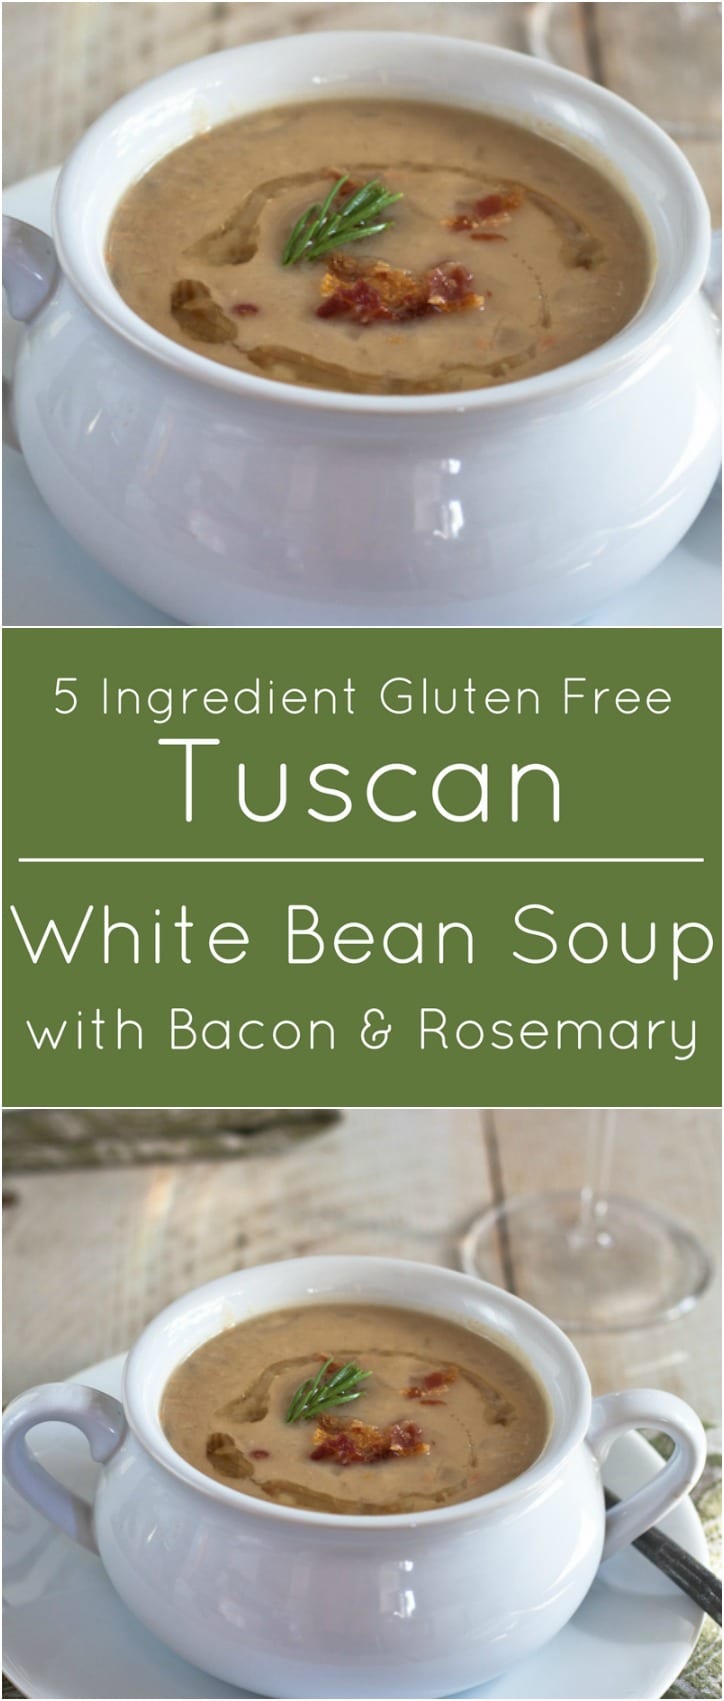 Easy Tuscan White Bean Soup with Bacon and Rosemary. 5 ingredients, 30 minutes and gluten free!